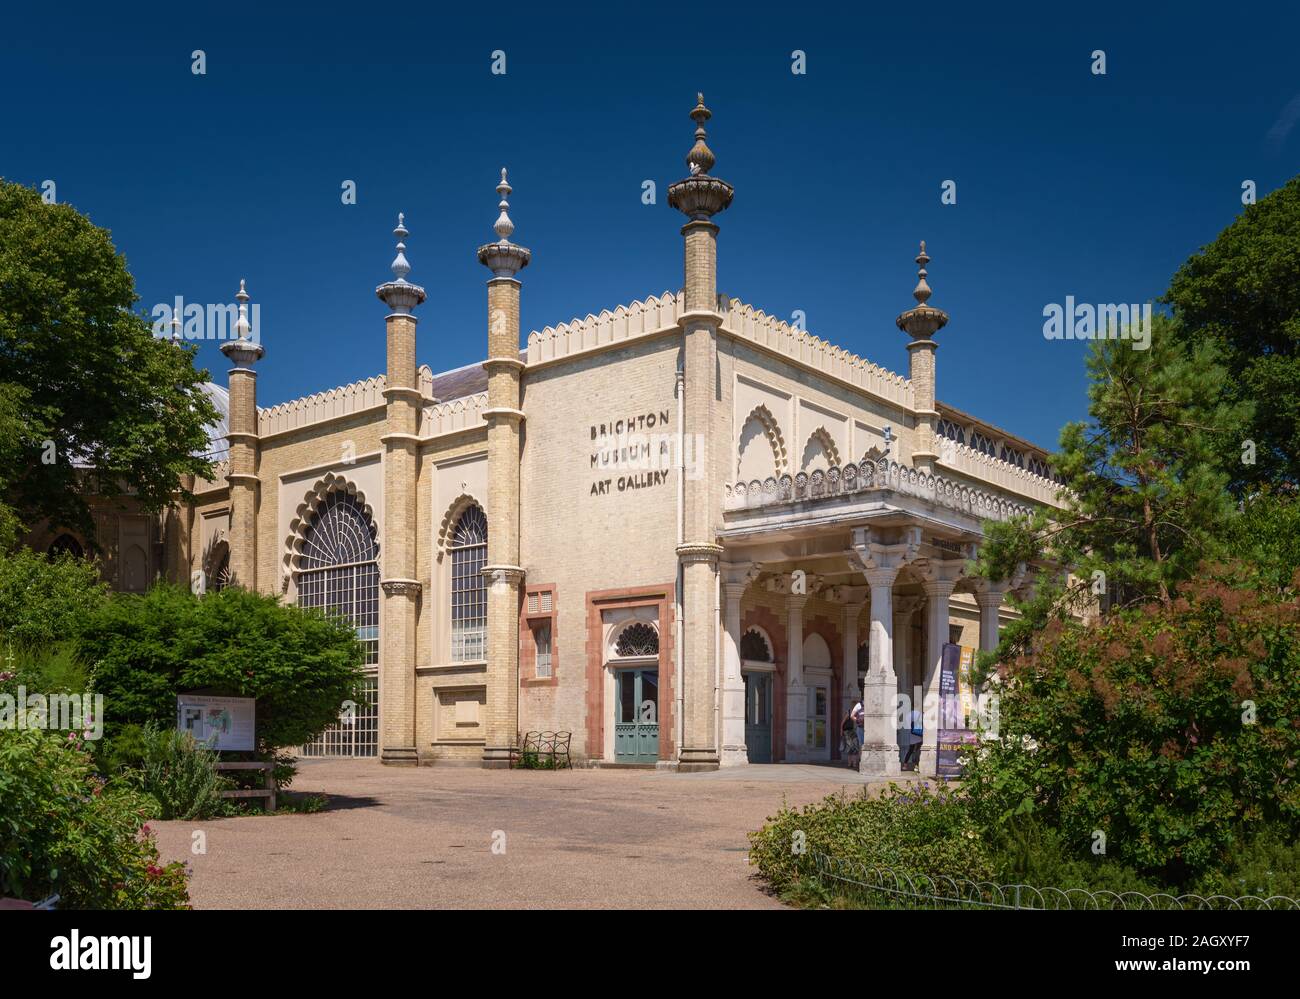 Brighton Museum and Art Gallery, UK Banque D'Images